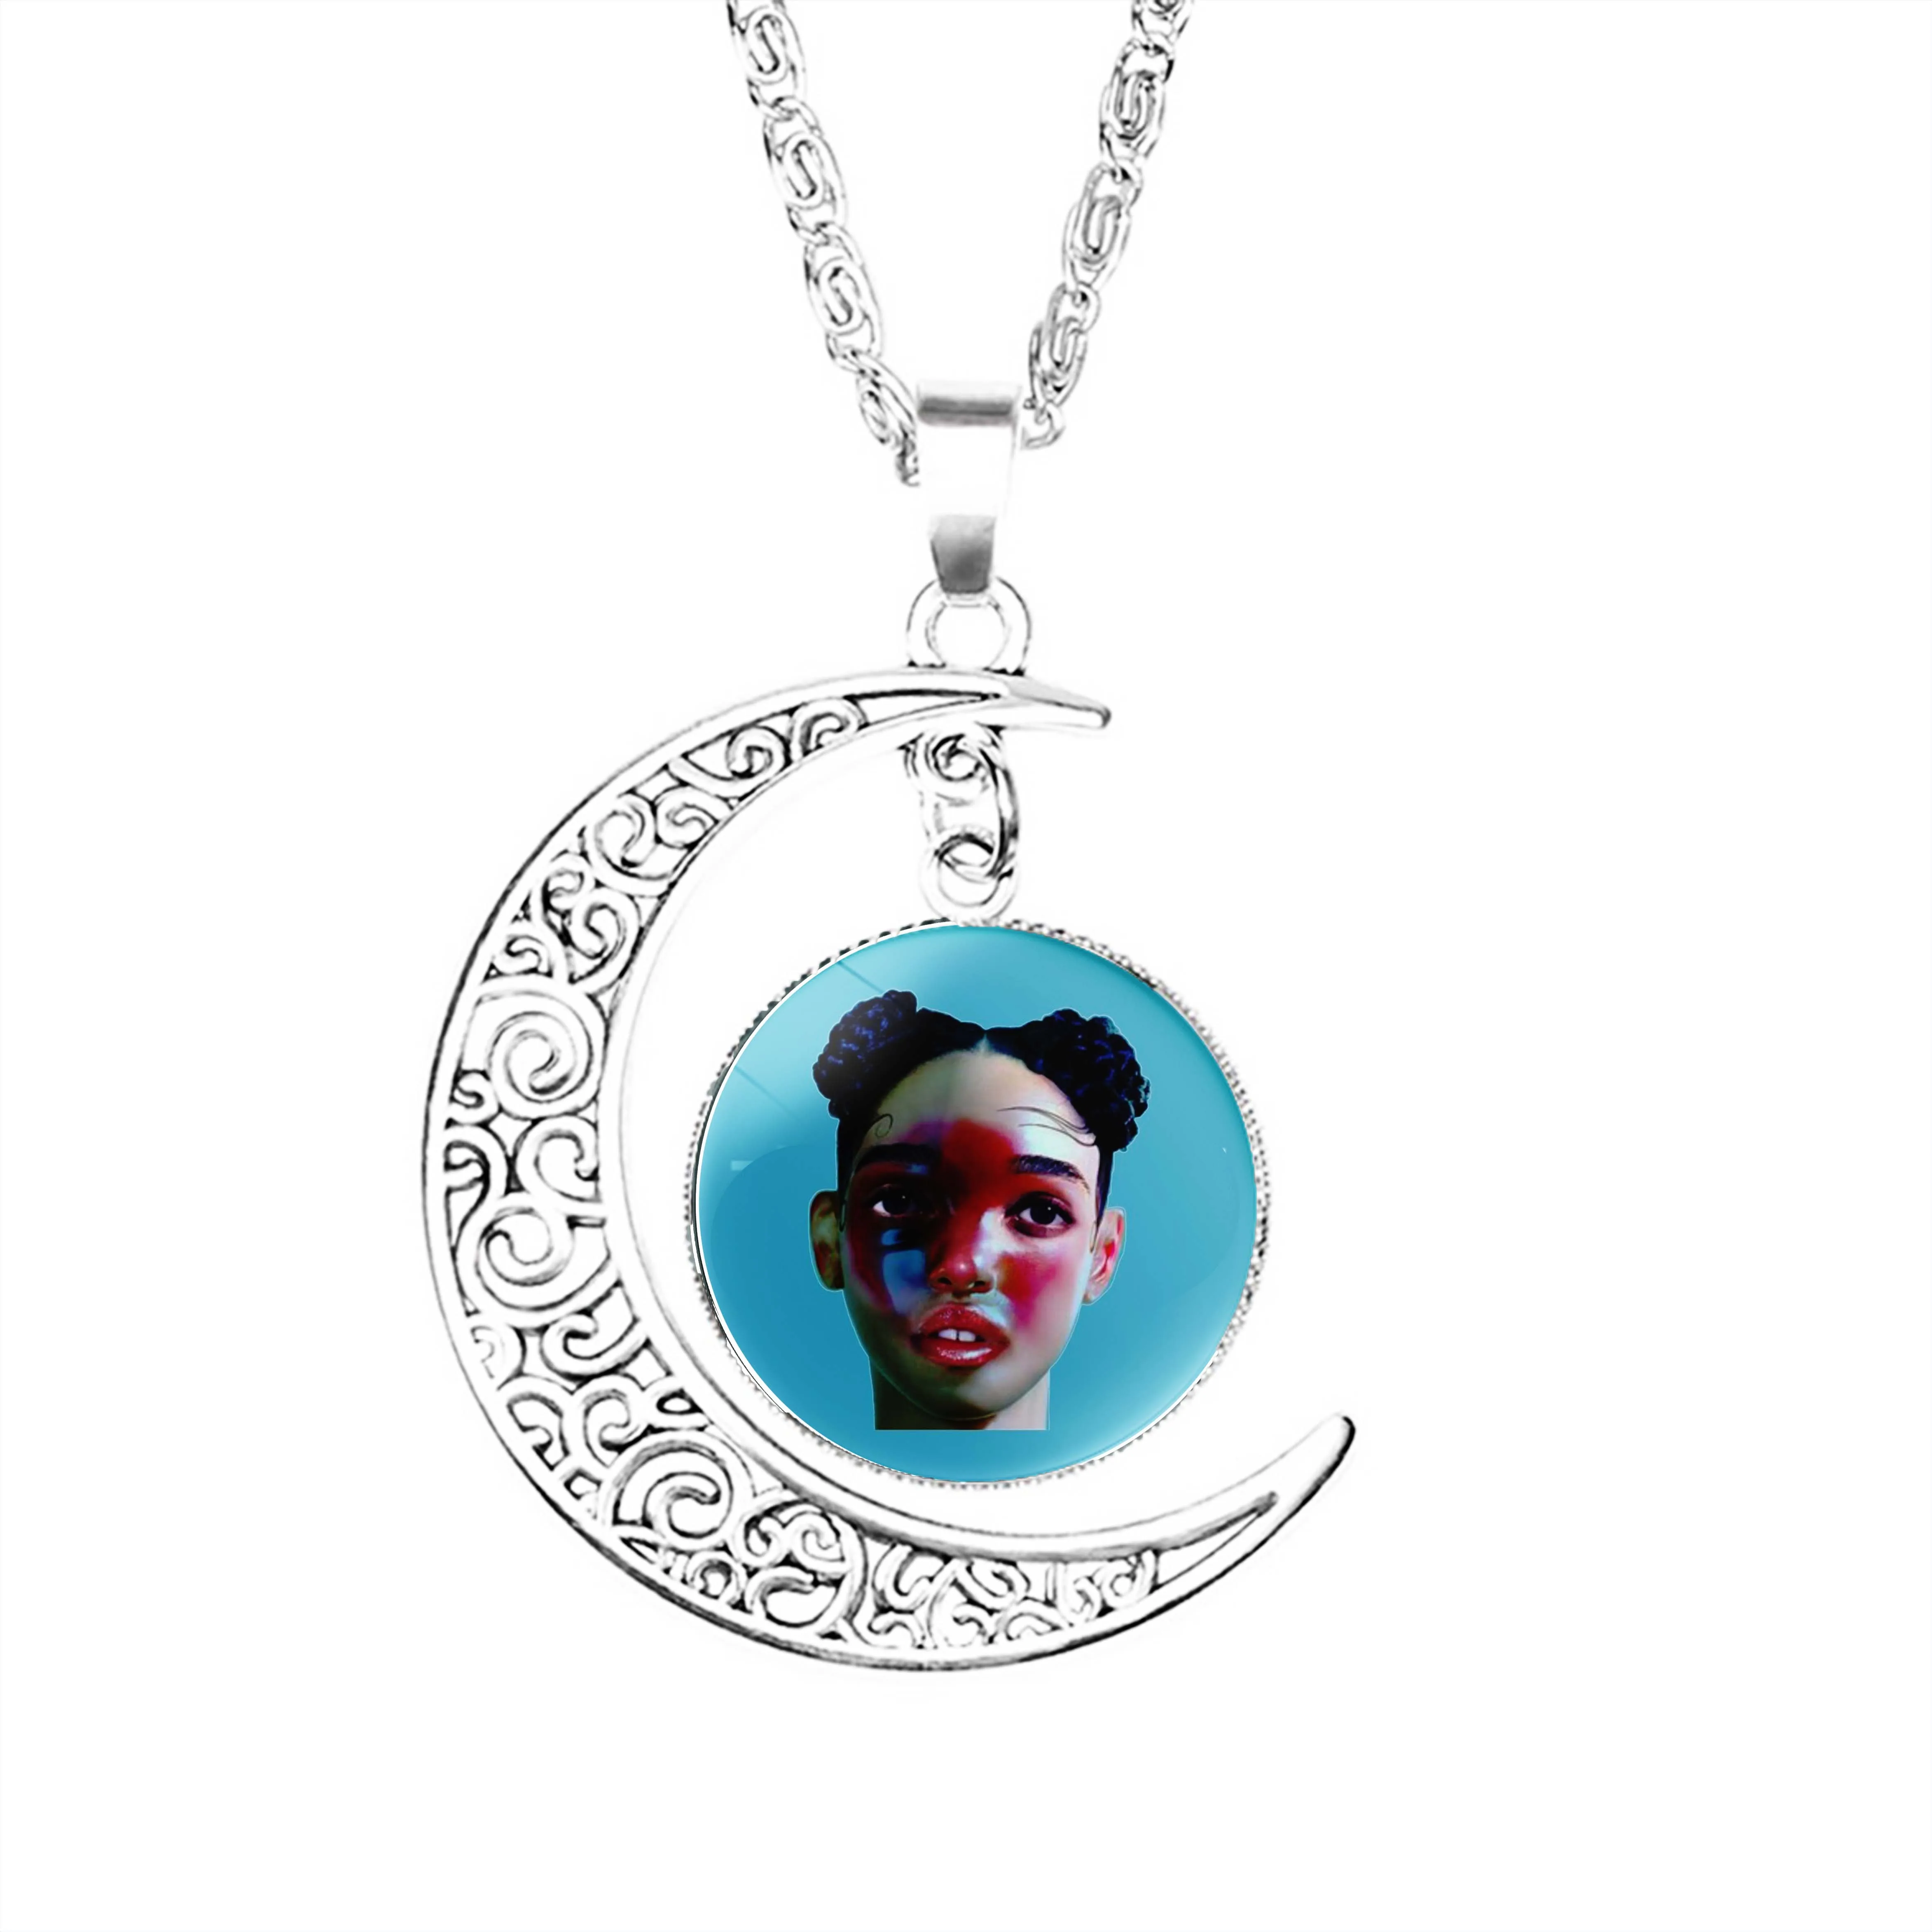 

Fka Twigs Lp1 Moon Necklace Jewelry Dome Chain Pendant Men Crescent Girls Stainless Steel Charm Lovers Lady Boy Women Gifts